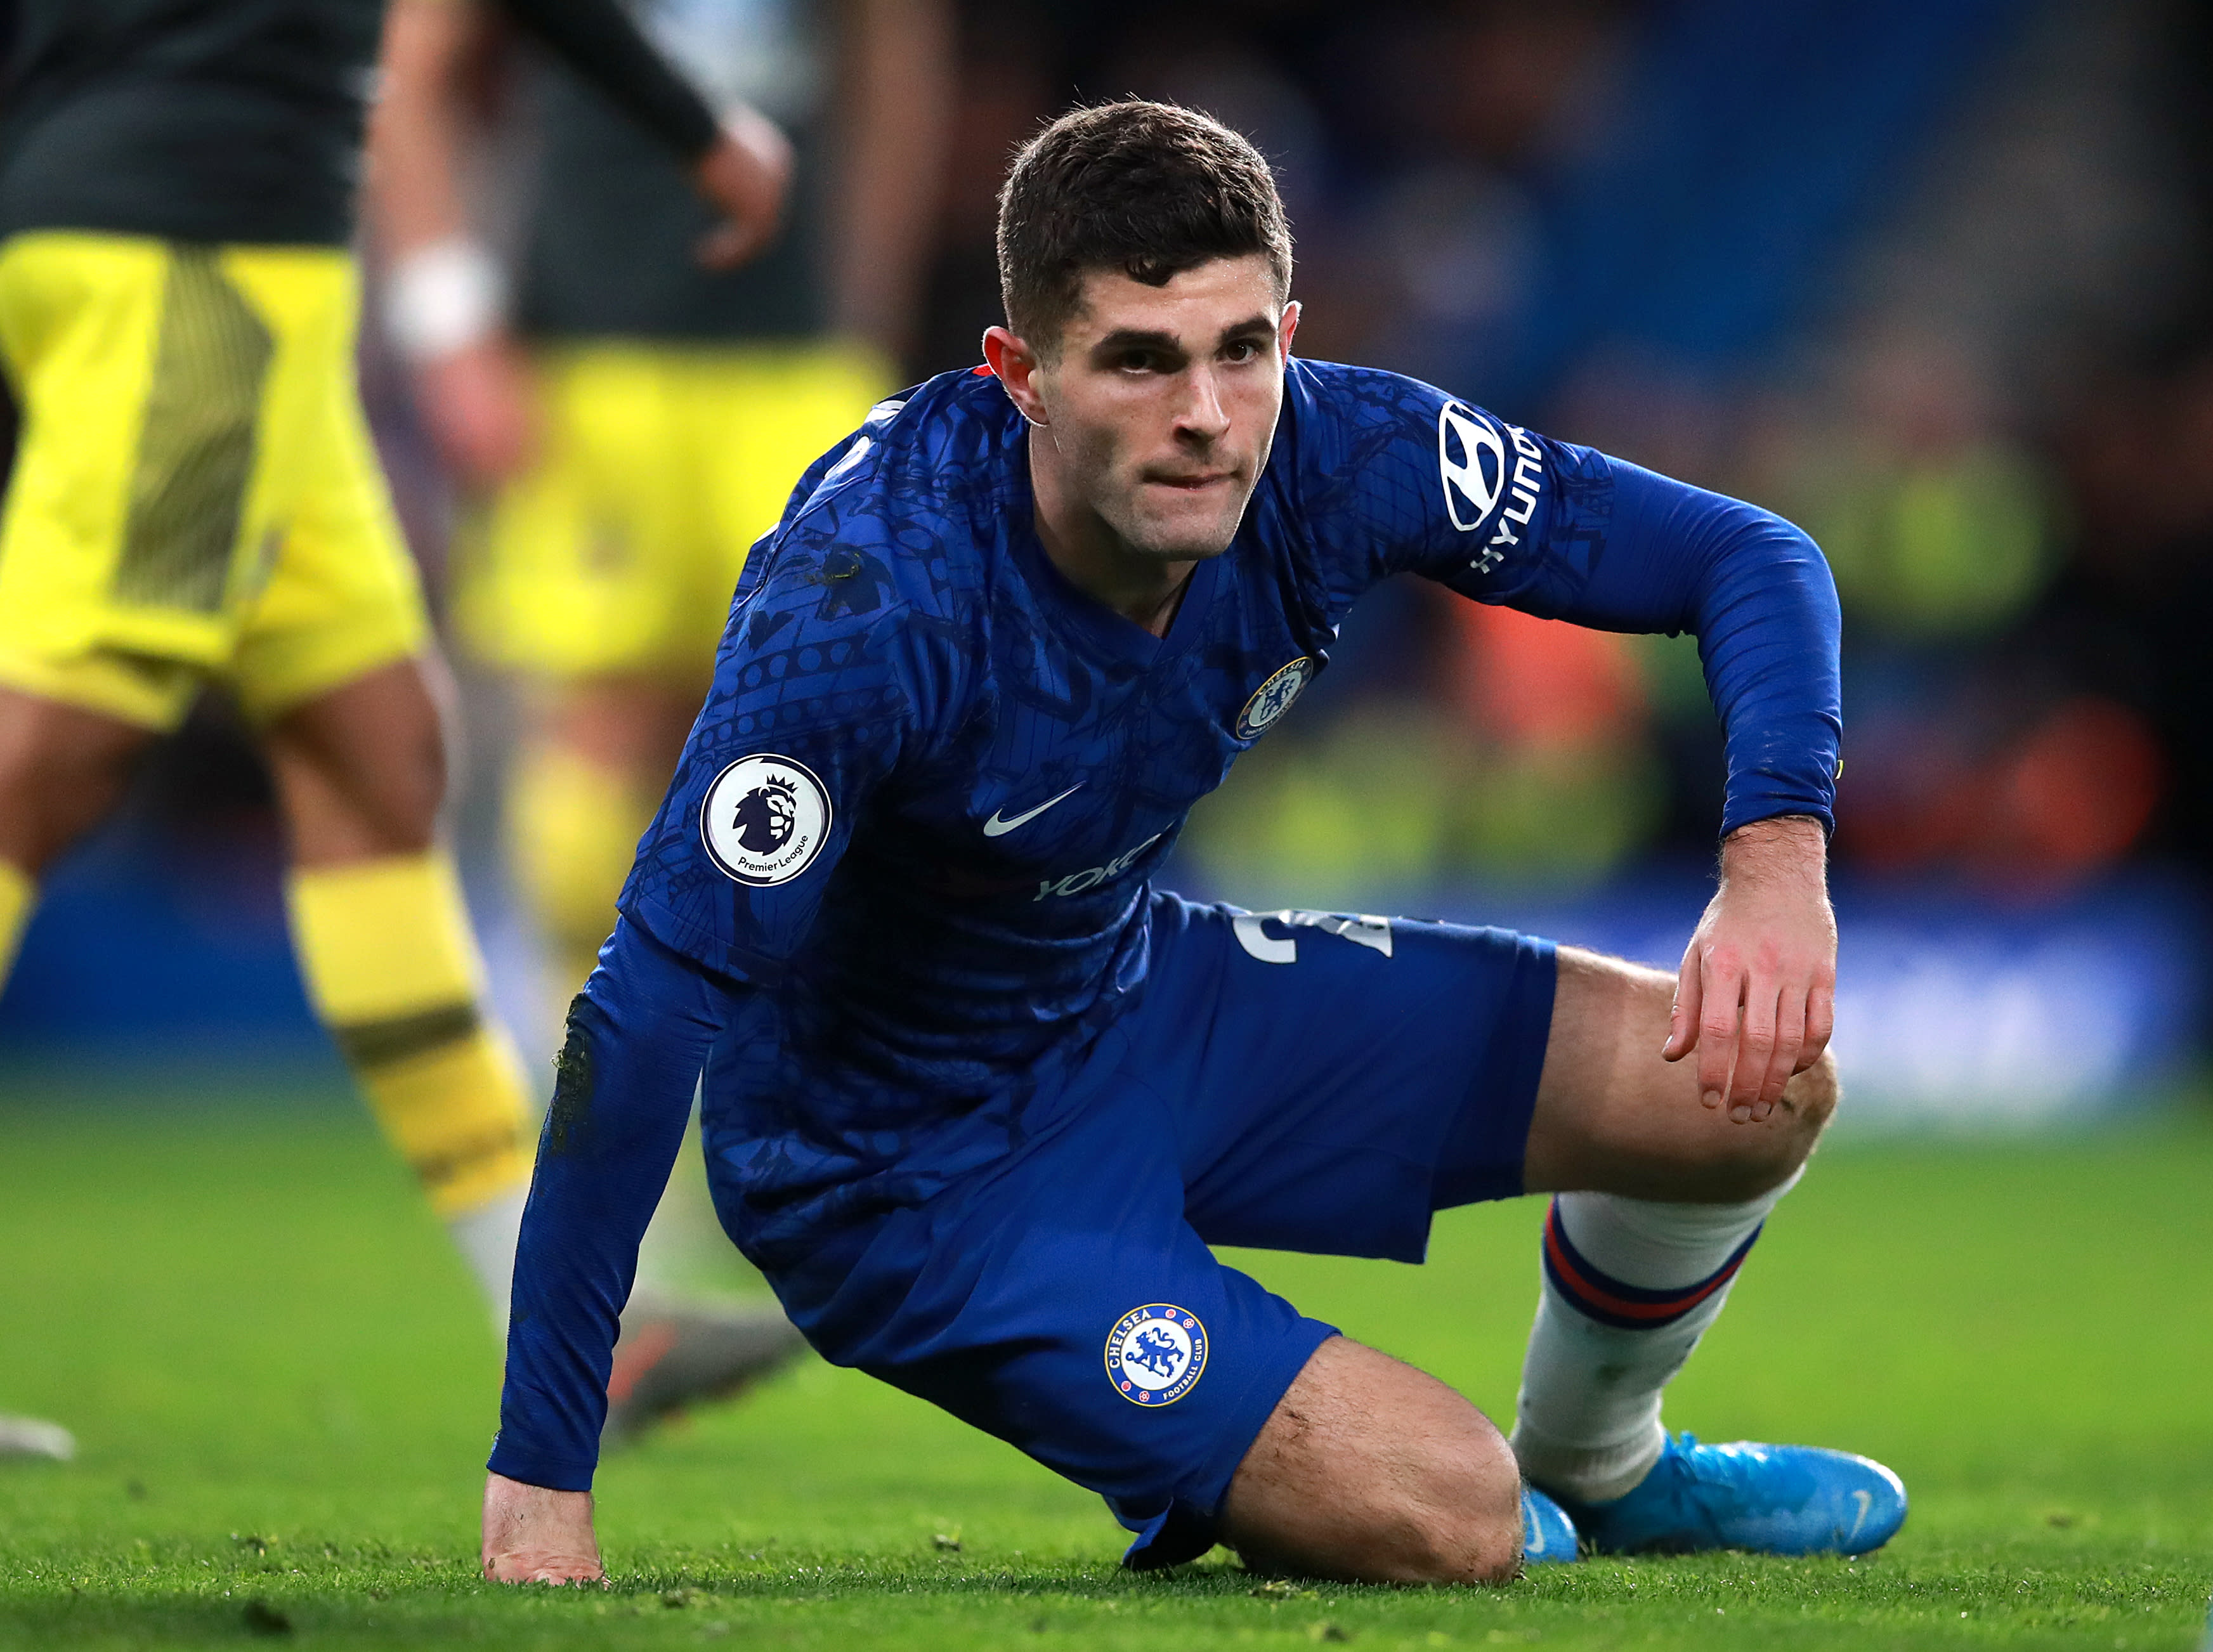 Chelsea's Christian Pulisic to miss 'a few weeks' with injury